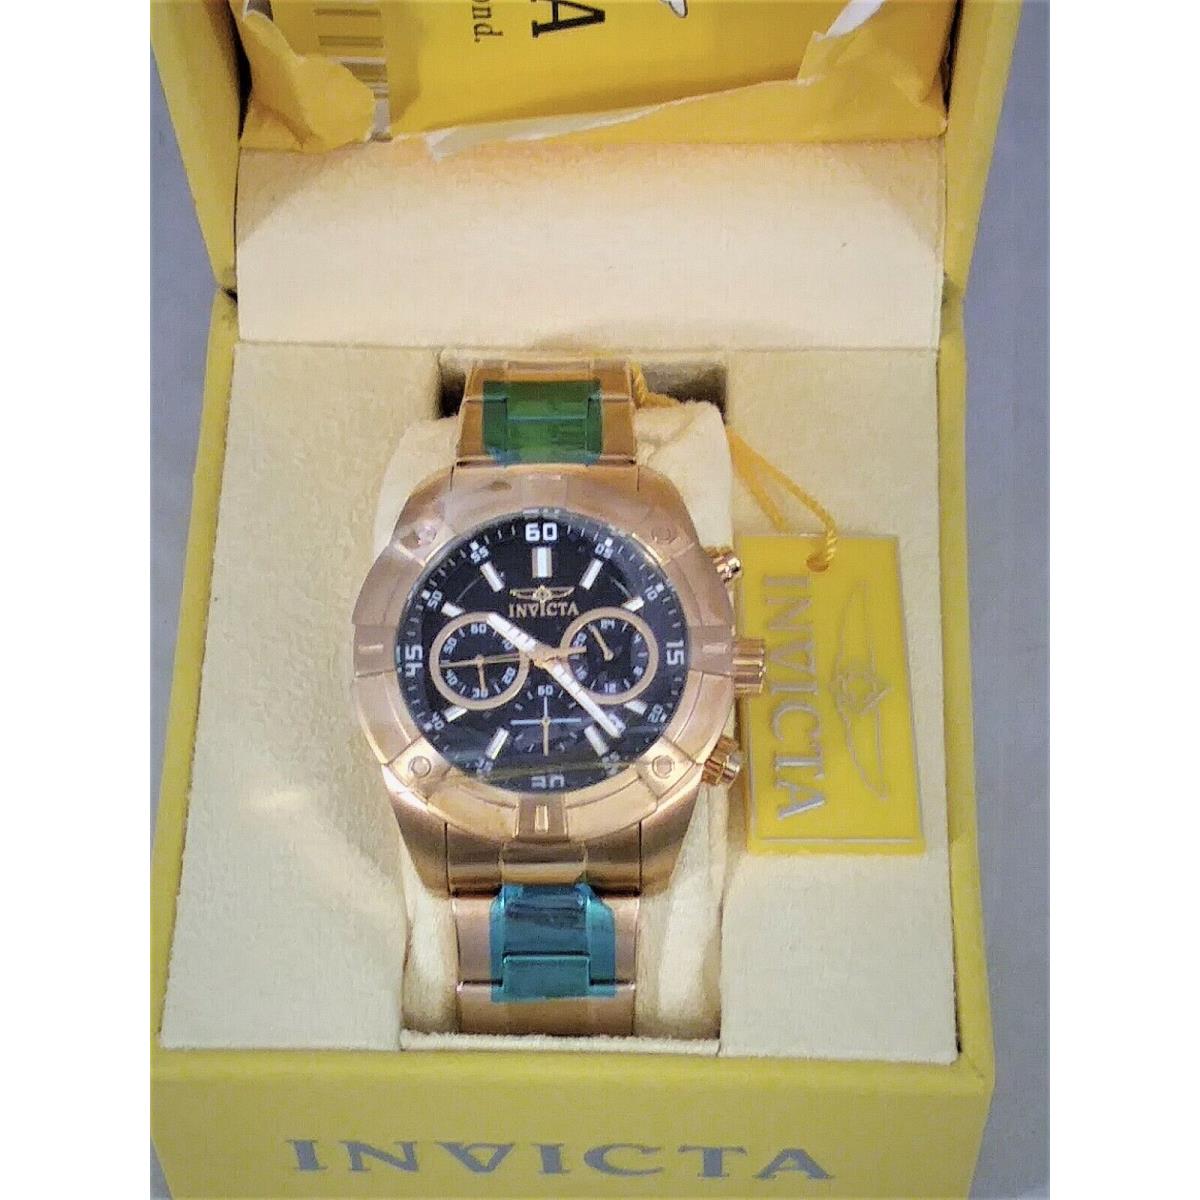 Invicta watch Specialty - Black Face, Gold Dial, Gold Band